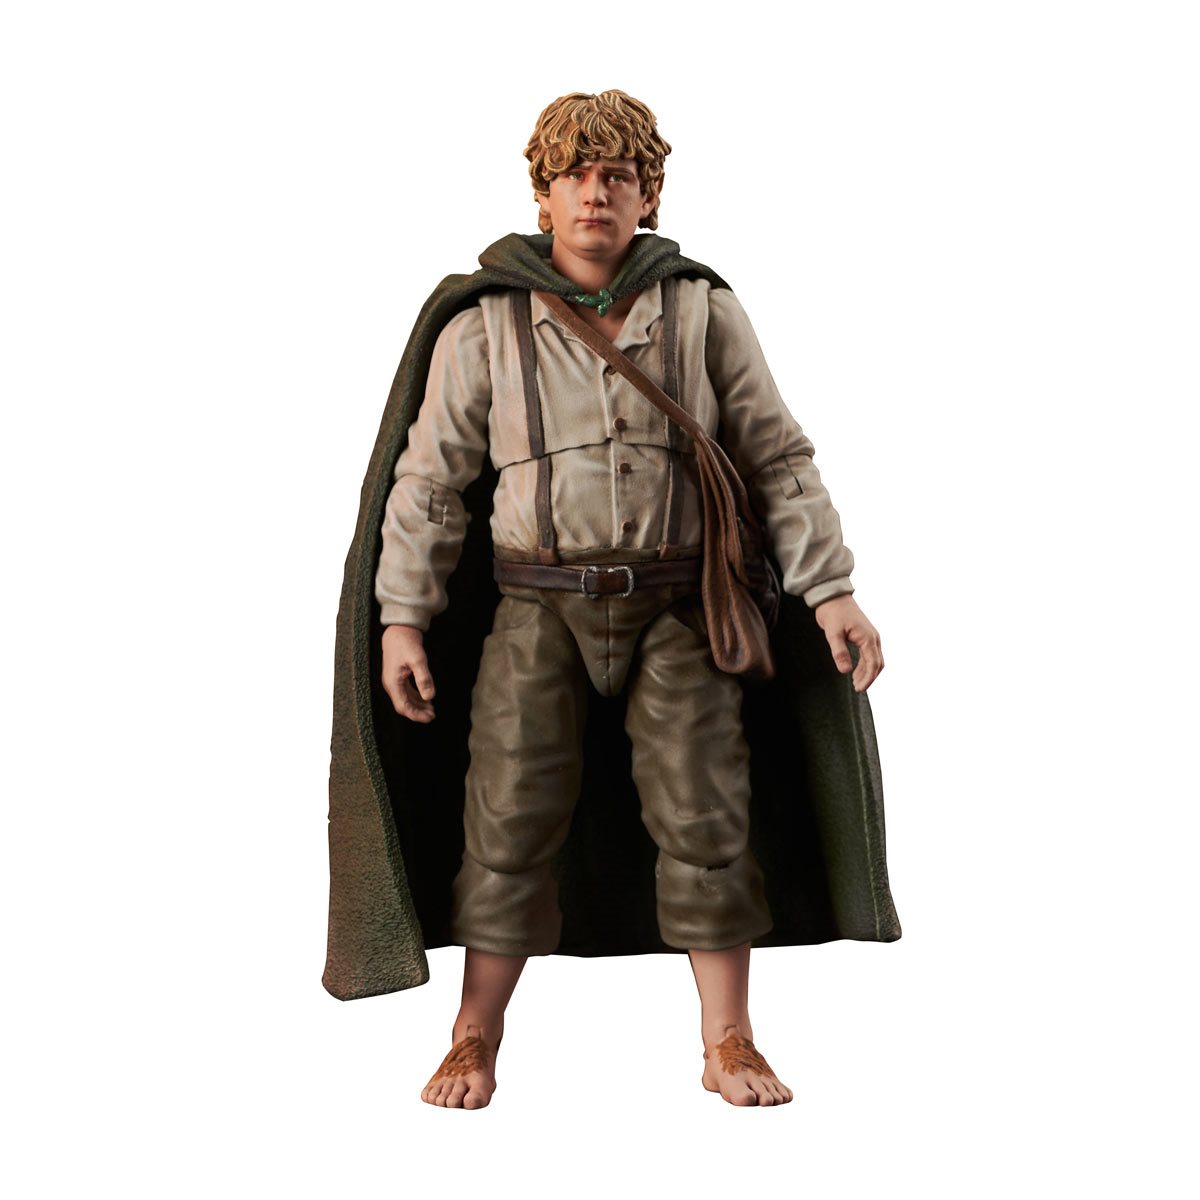 The Lord of the Rings Trilogy - Samwise Gamgee http://bit.ly/LOTRstore |  Facebook